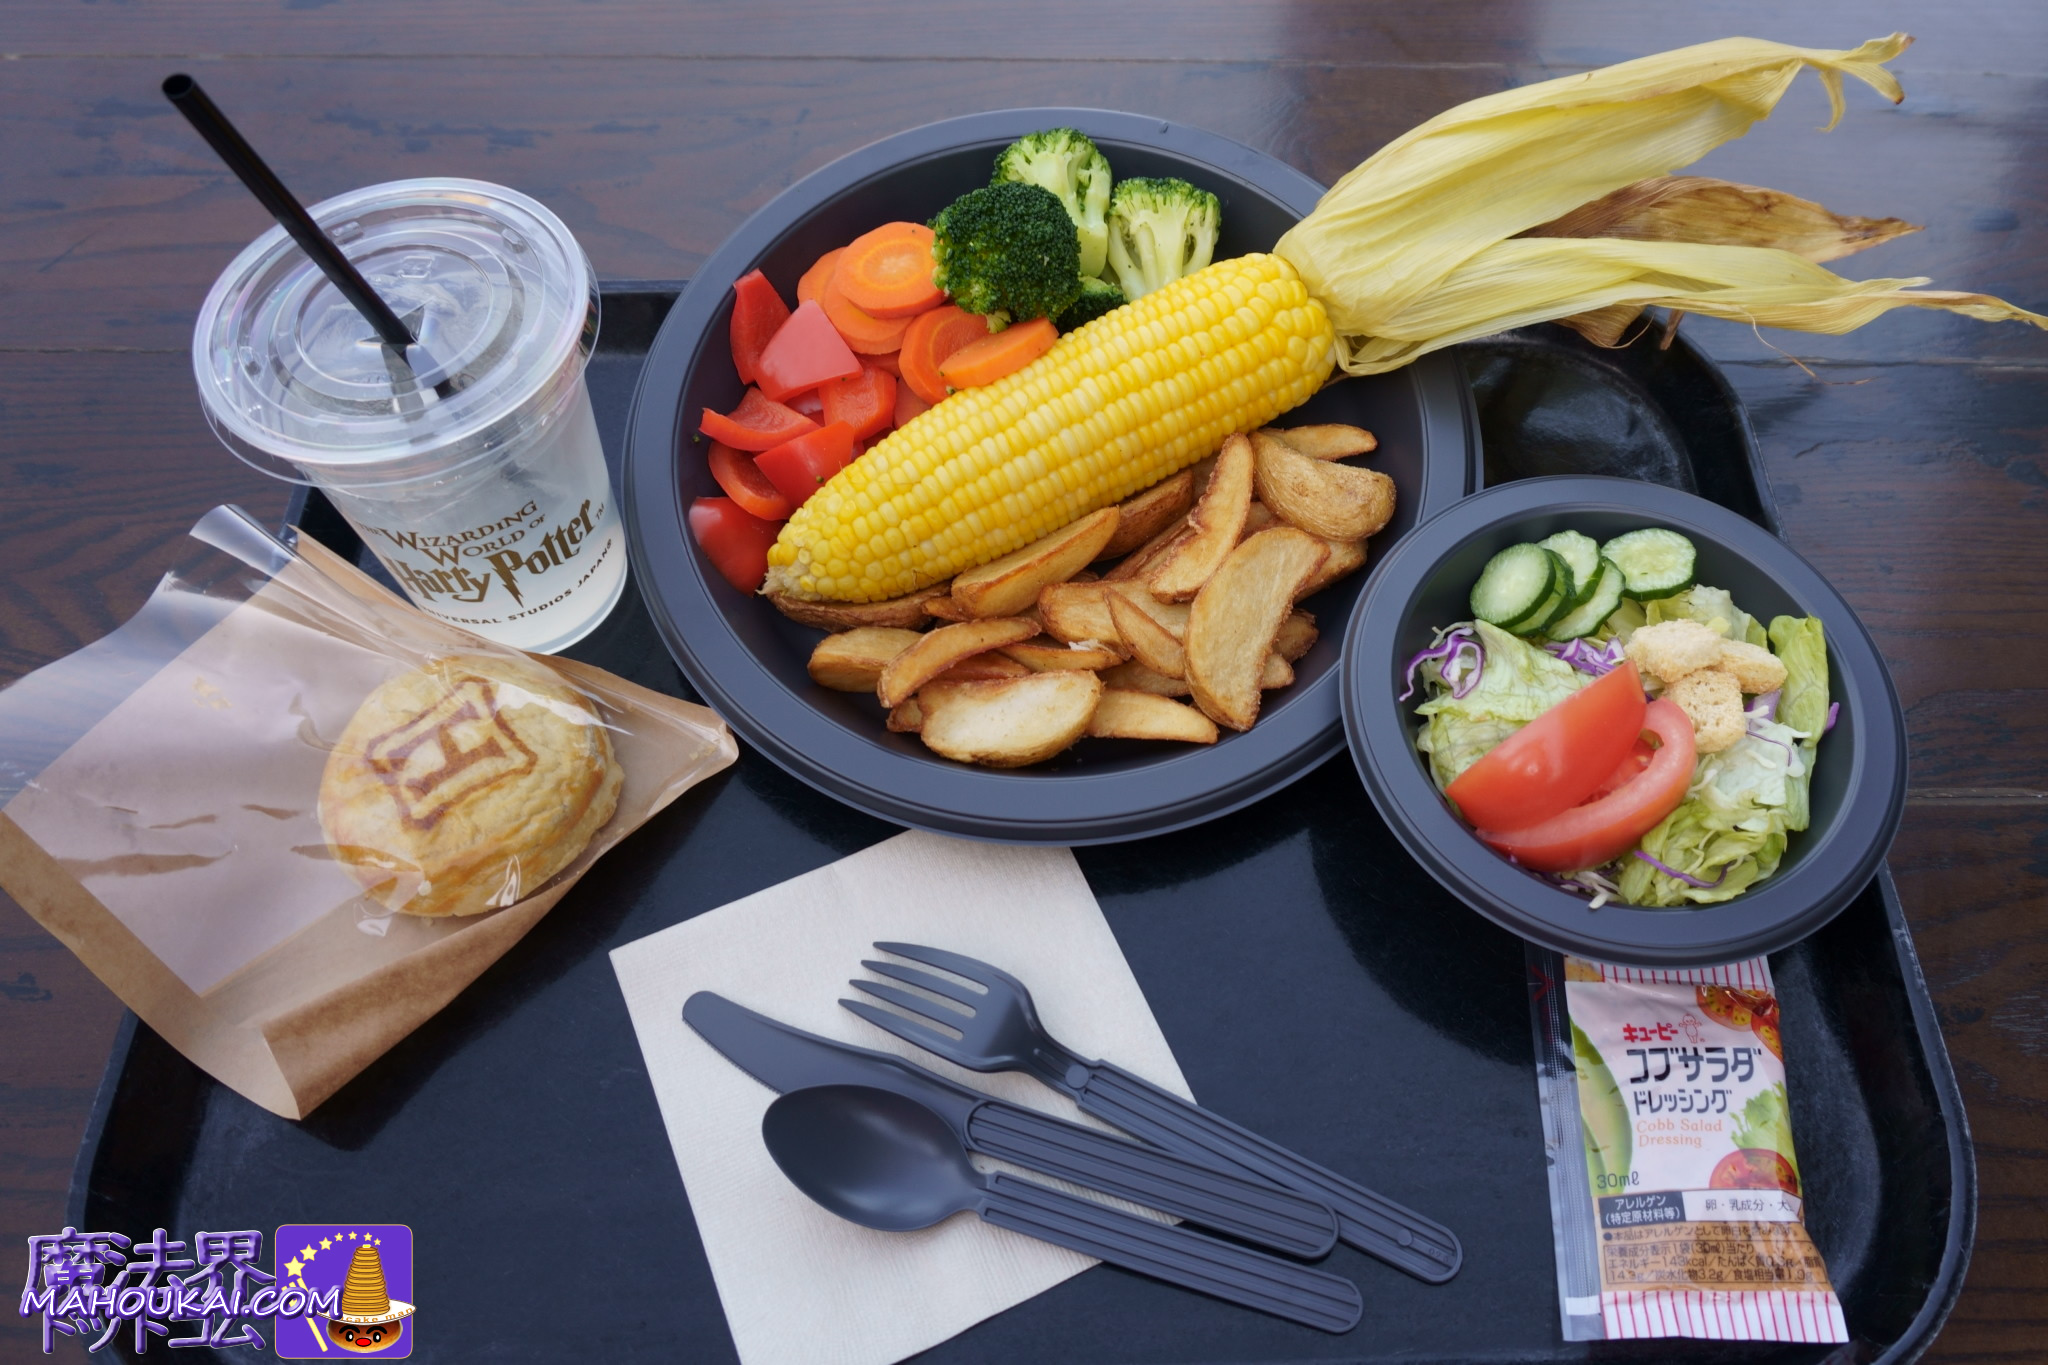 The Three Broomsticks vegetarian plate will be new in USJ's Harry Potter area in March 2023.